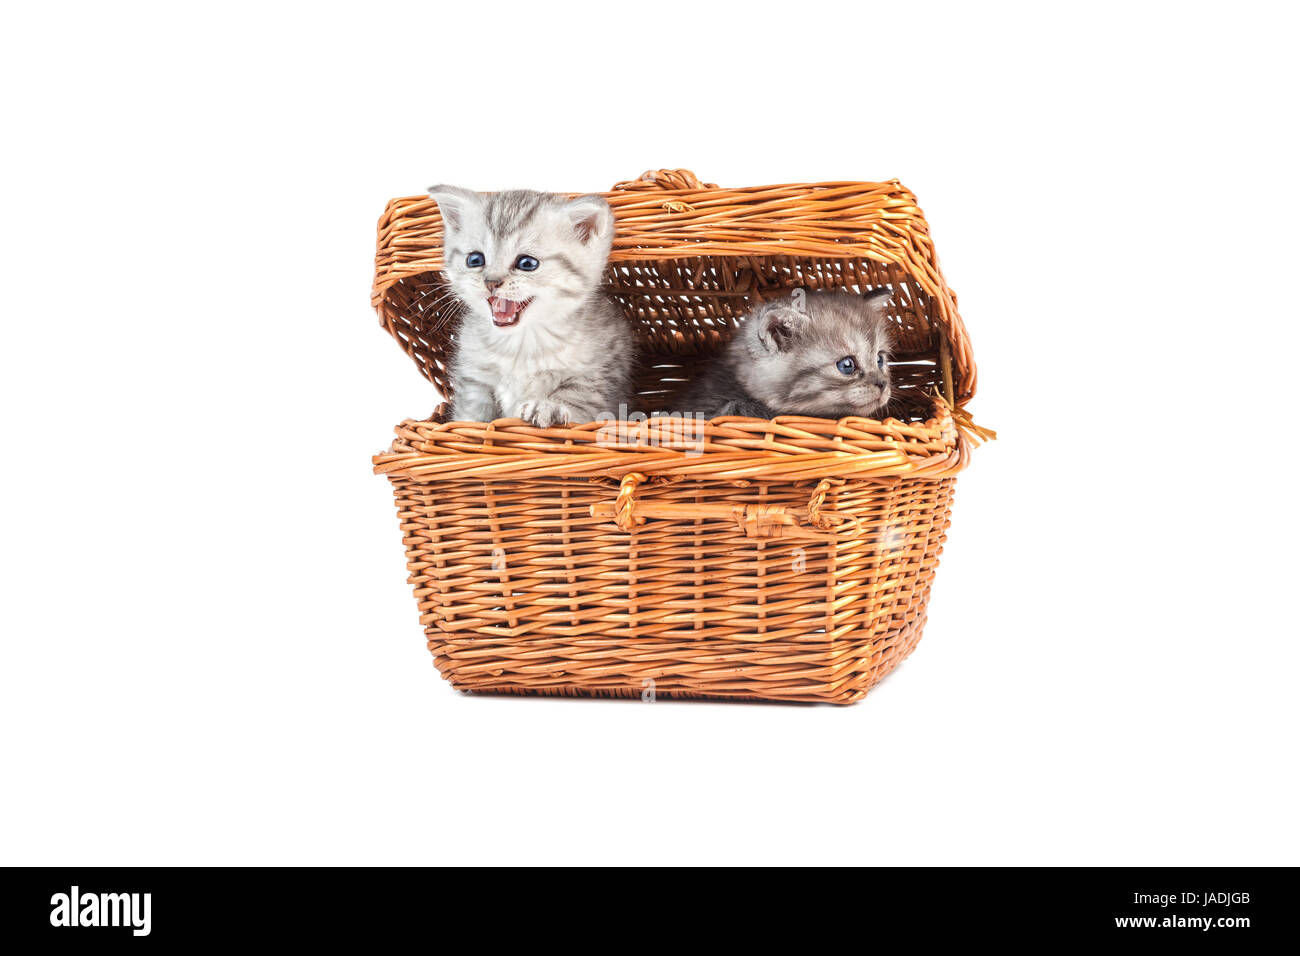 young kittens Stock Photo